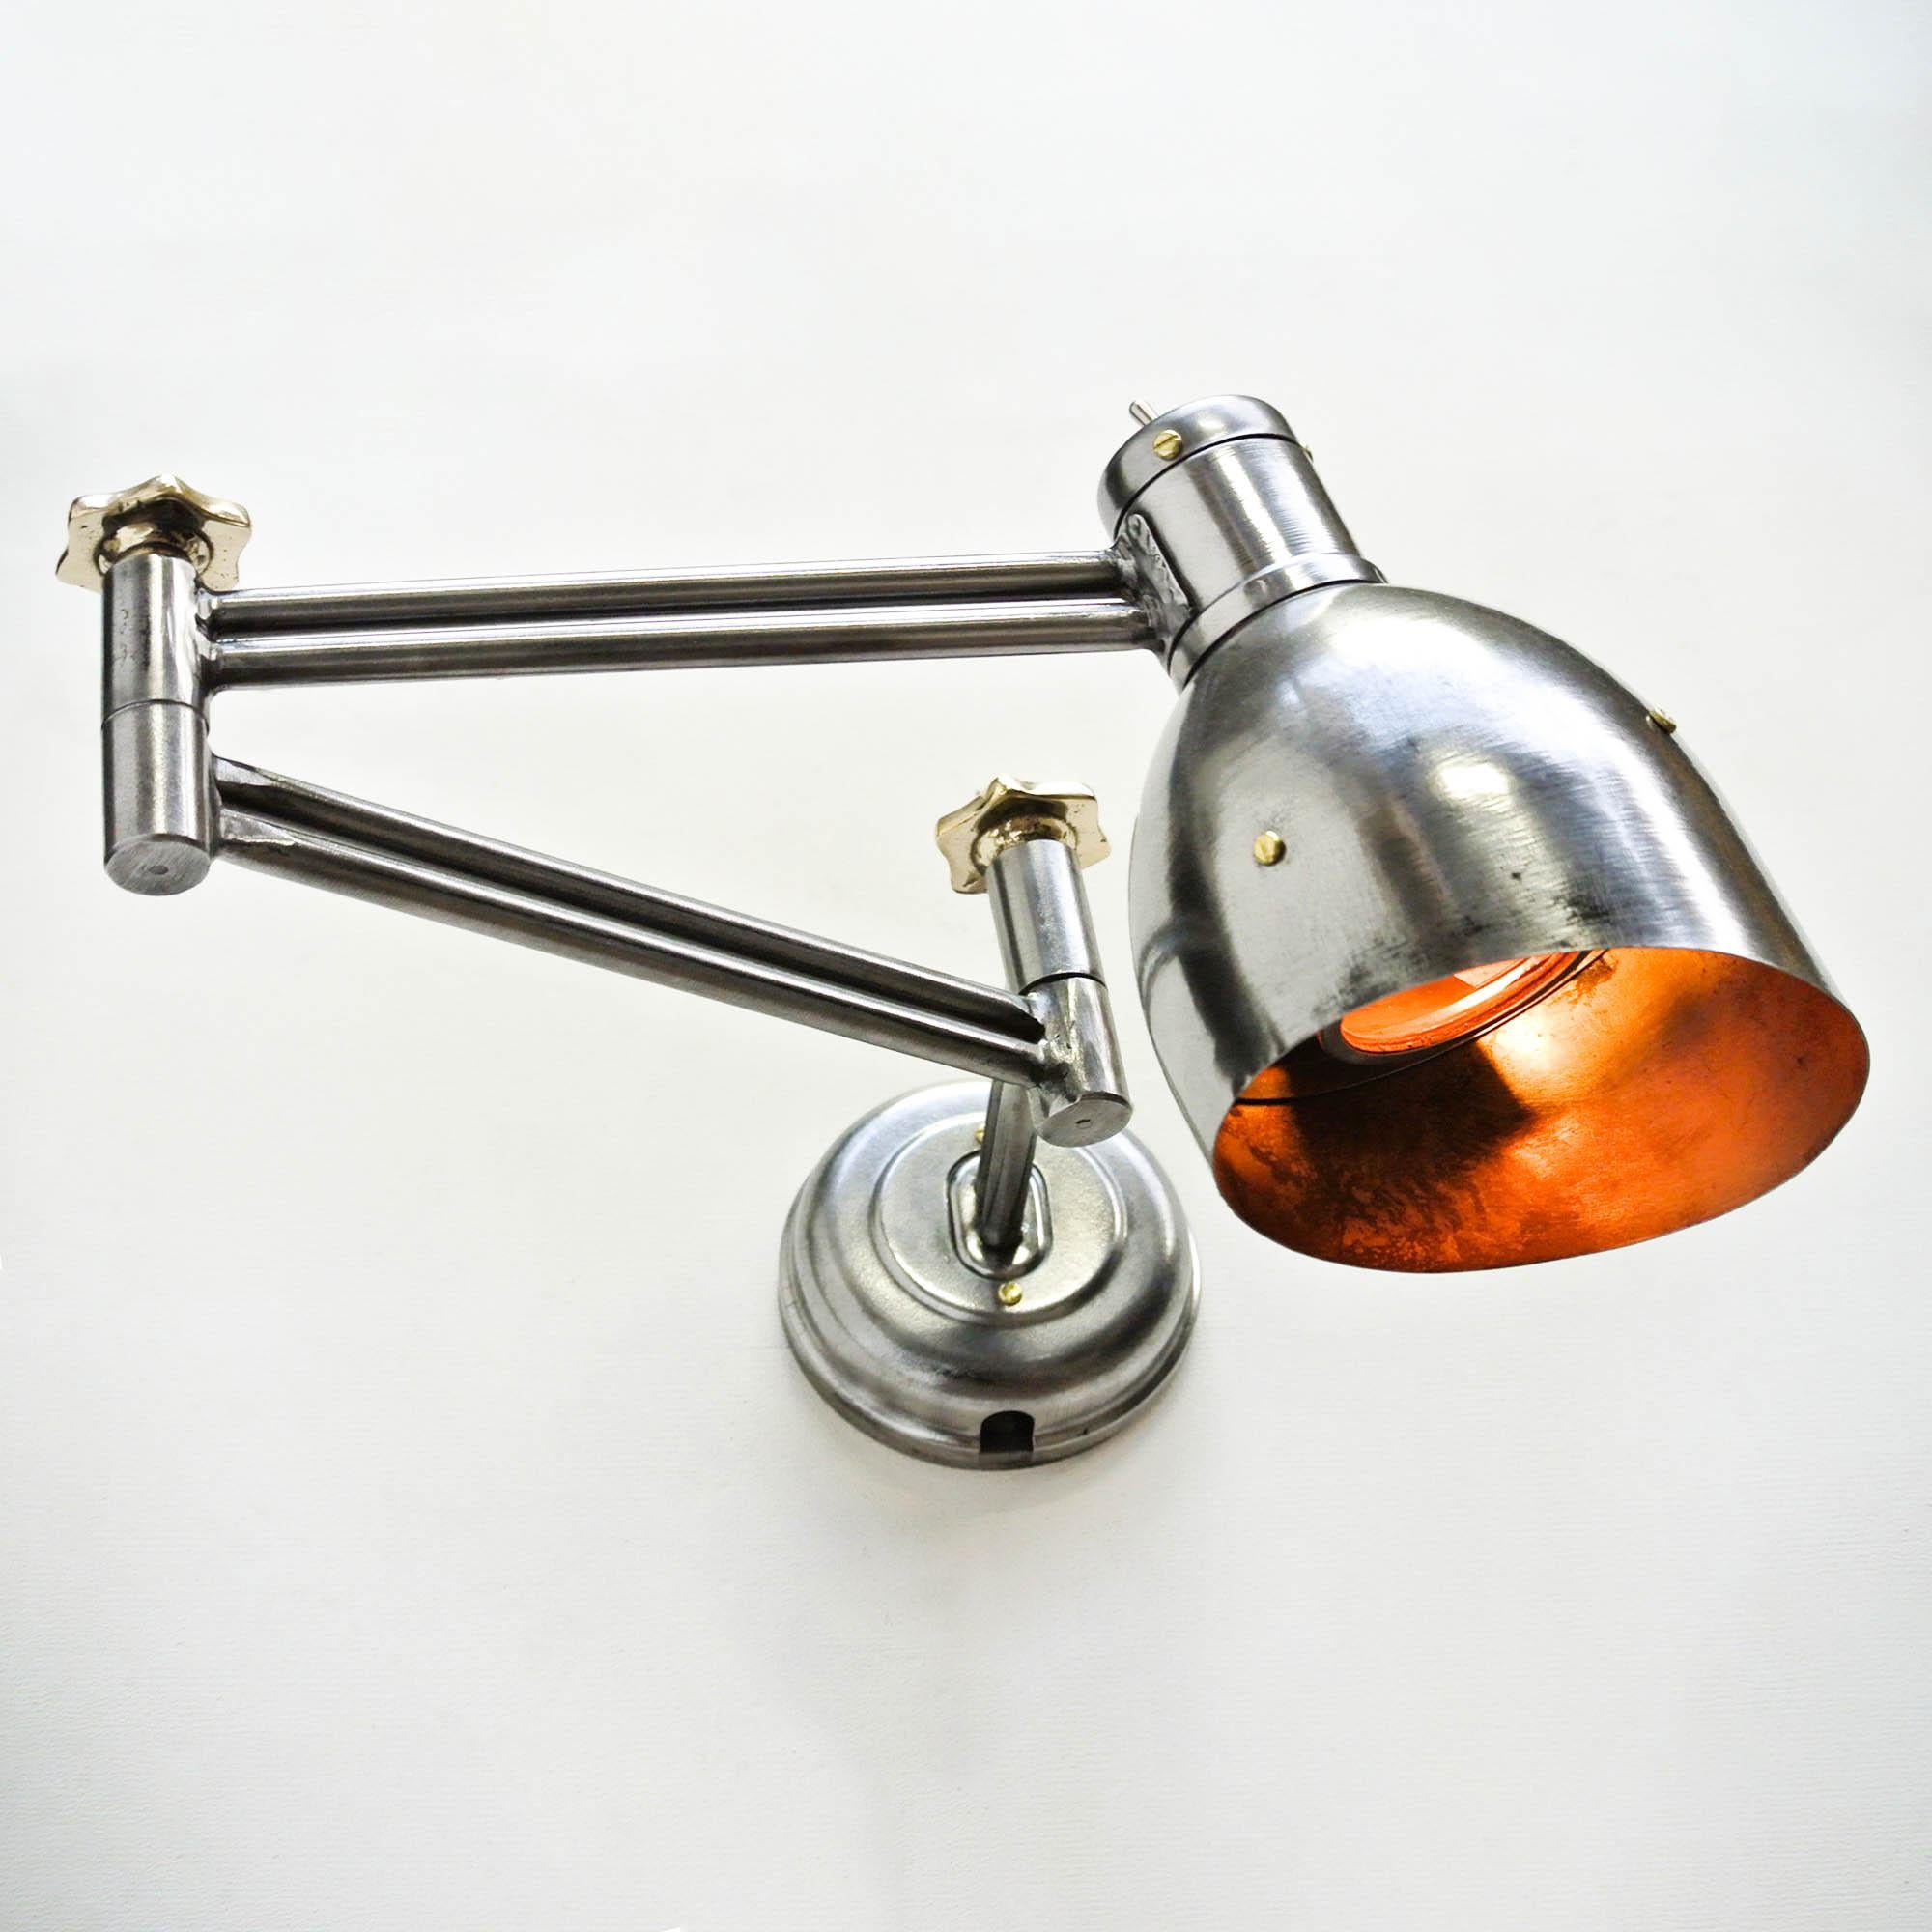 This old lamp originally used in manufacturing workshop in ex-Russia (URSS), is made of steel (stripped, brushed, polished, varnished), and adjustment wheels made of brass at each end of strenghtened articulated arms. Base in pressed steel allowing